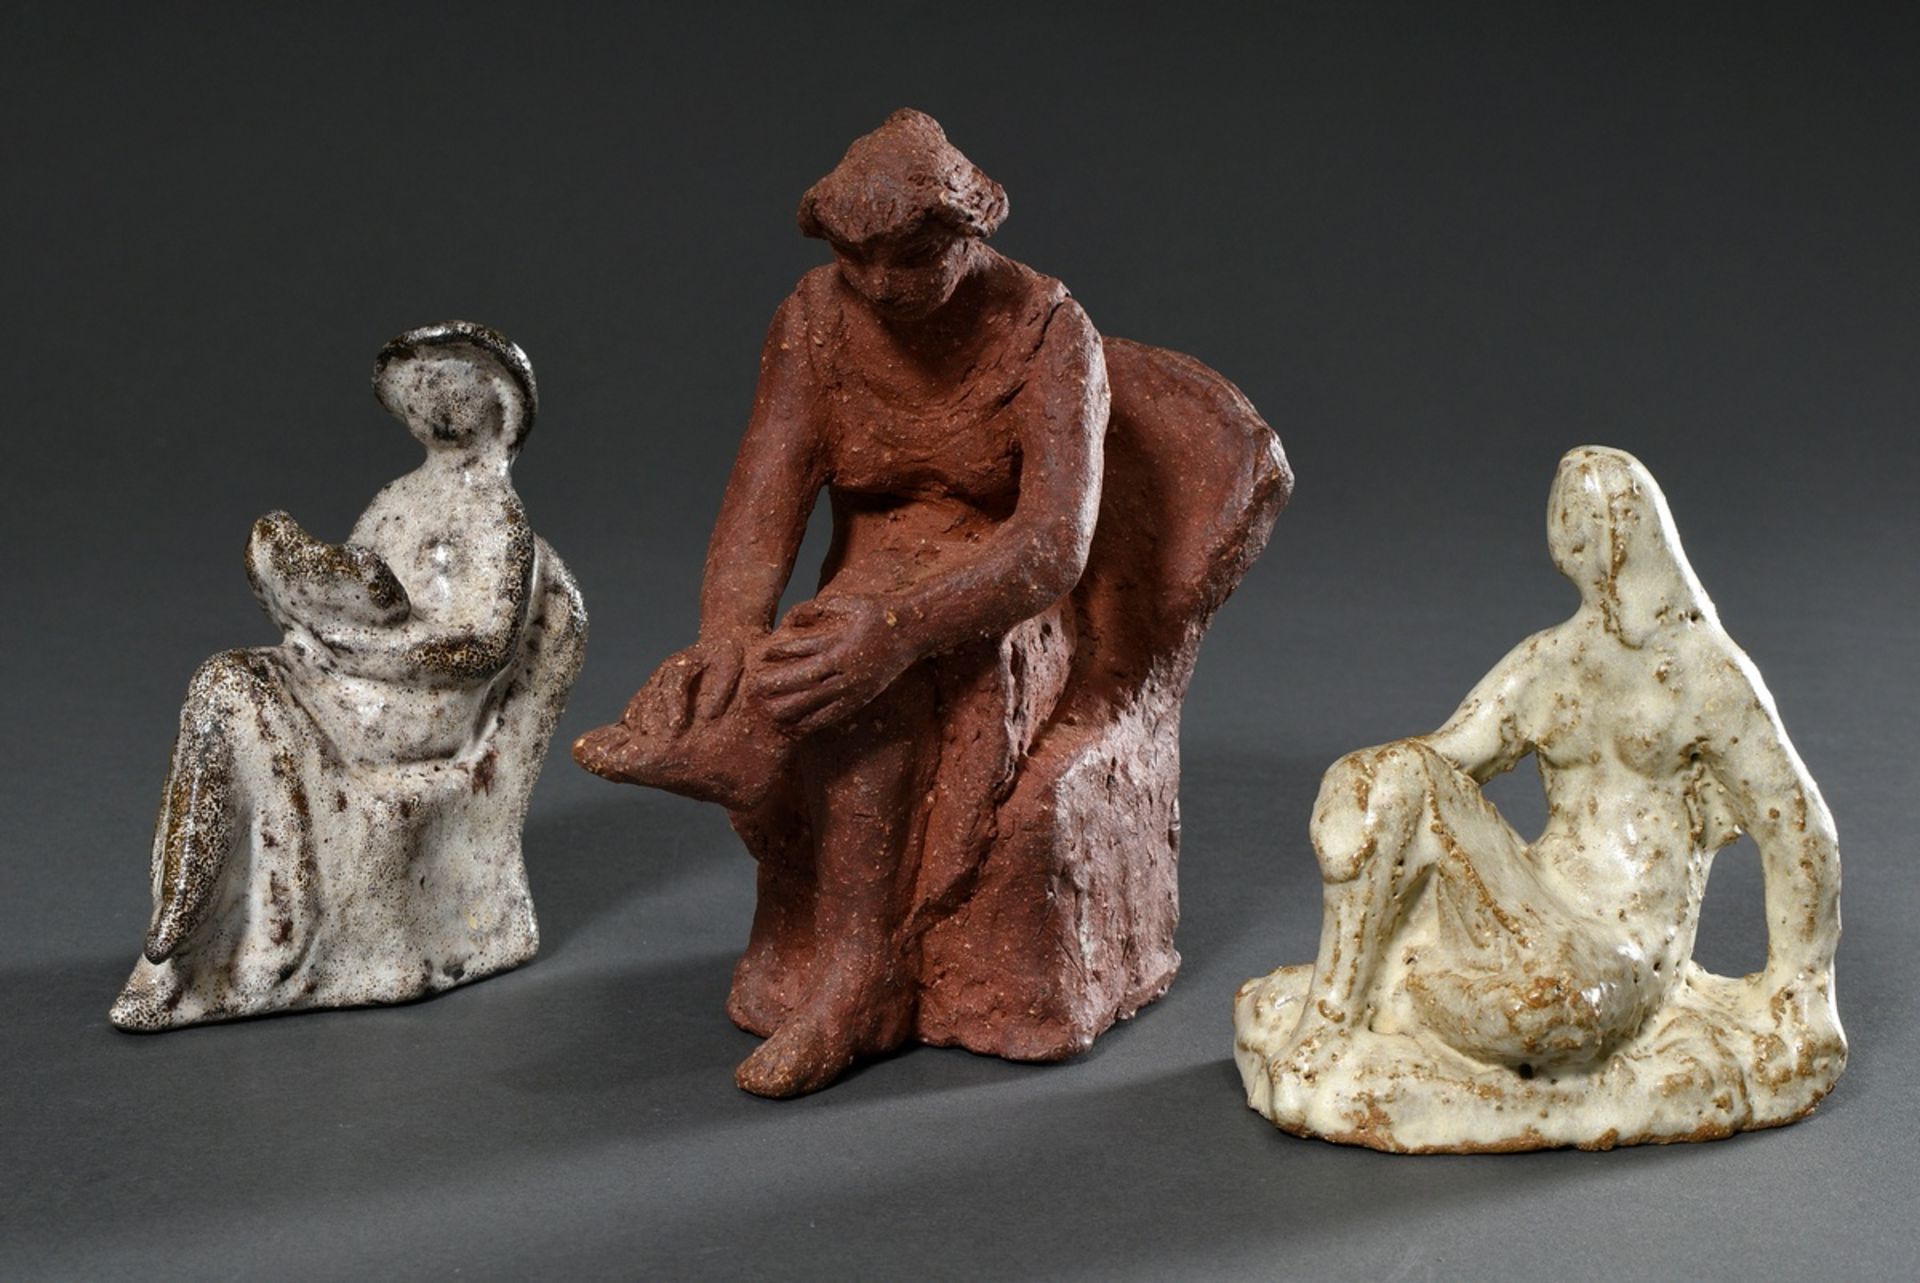 3 Various Maetzel, Monika (1917-2010) figures "Resting woman", "Woman with hat and book on chair" a